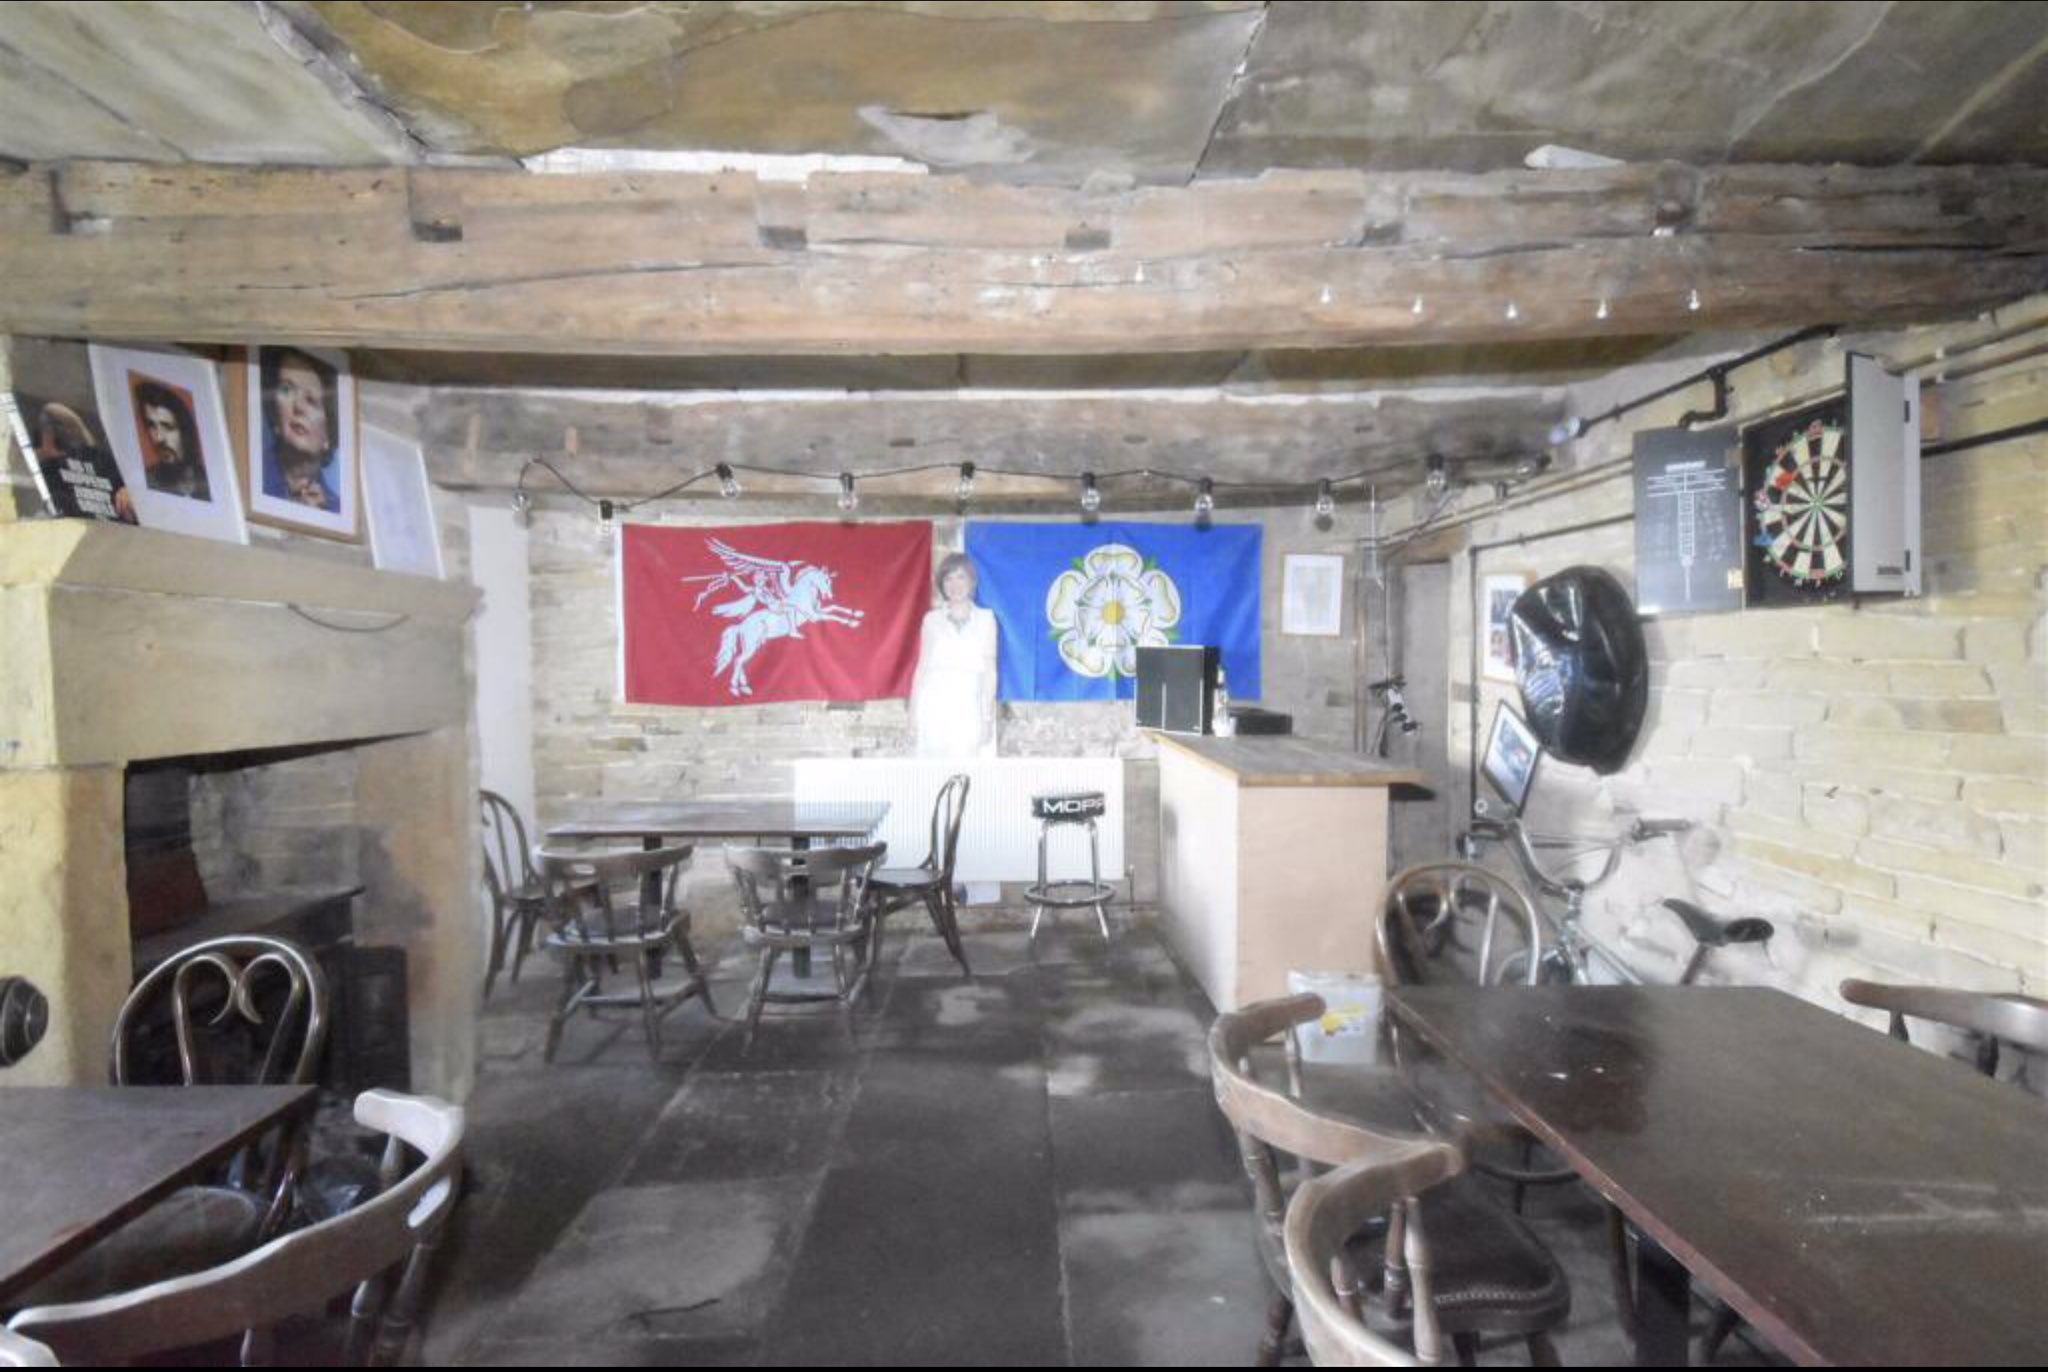 This Yorkshire cottage has a basement bar with shrine to VERY unlikely celebrities